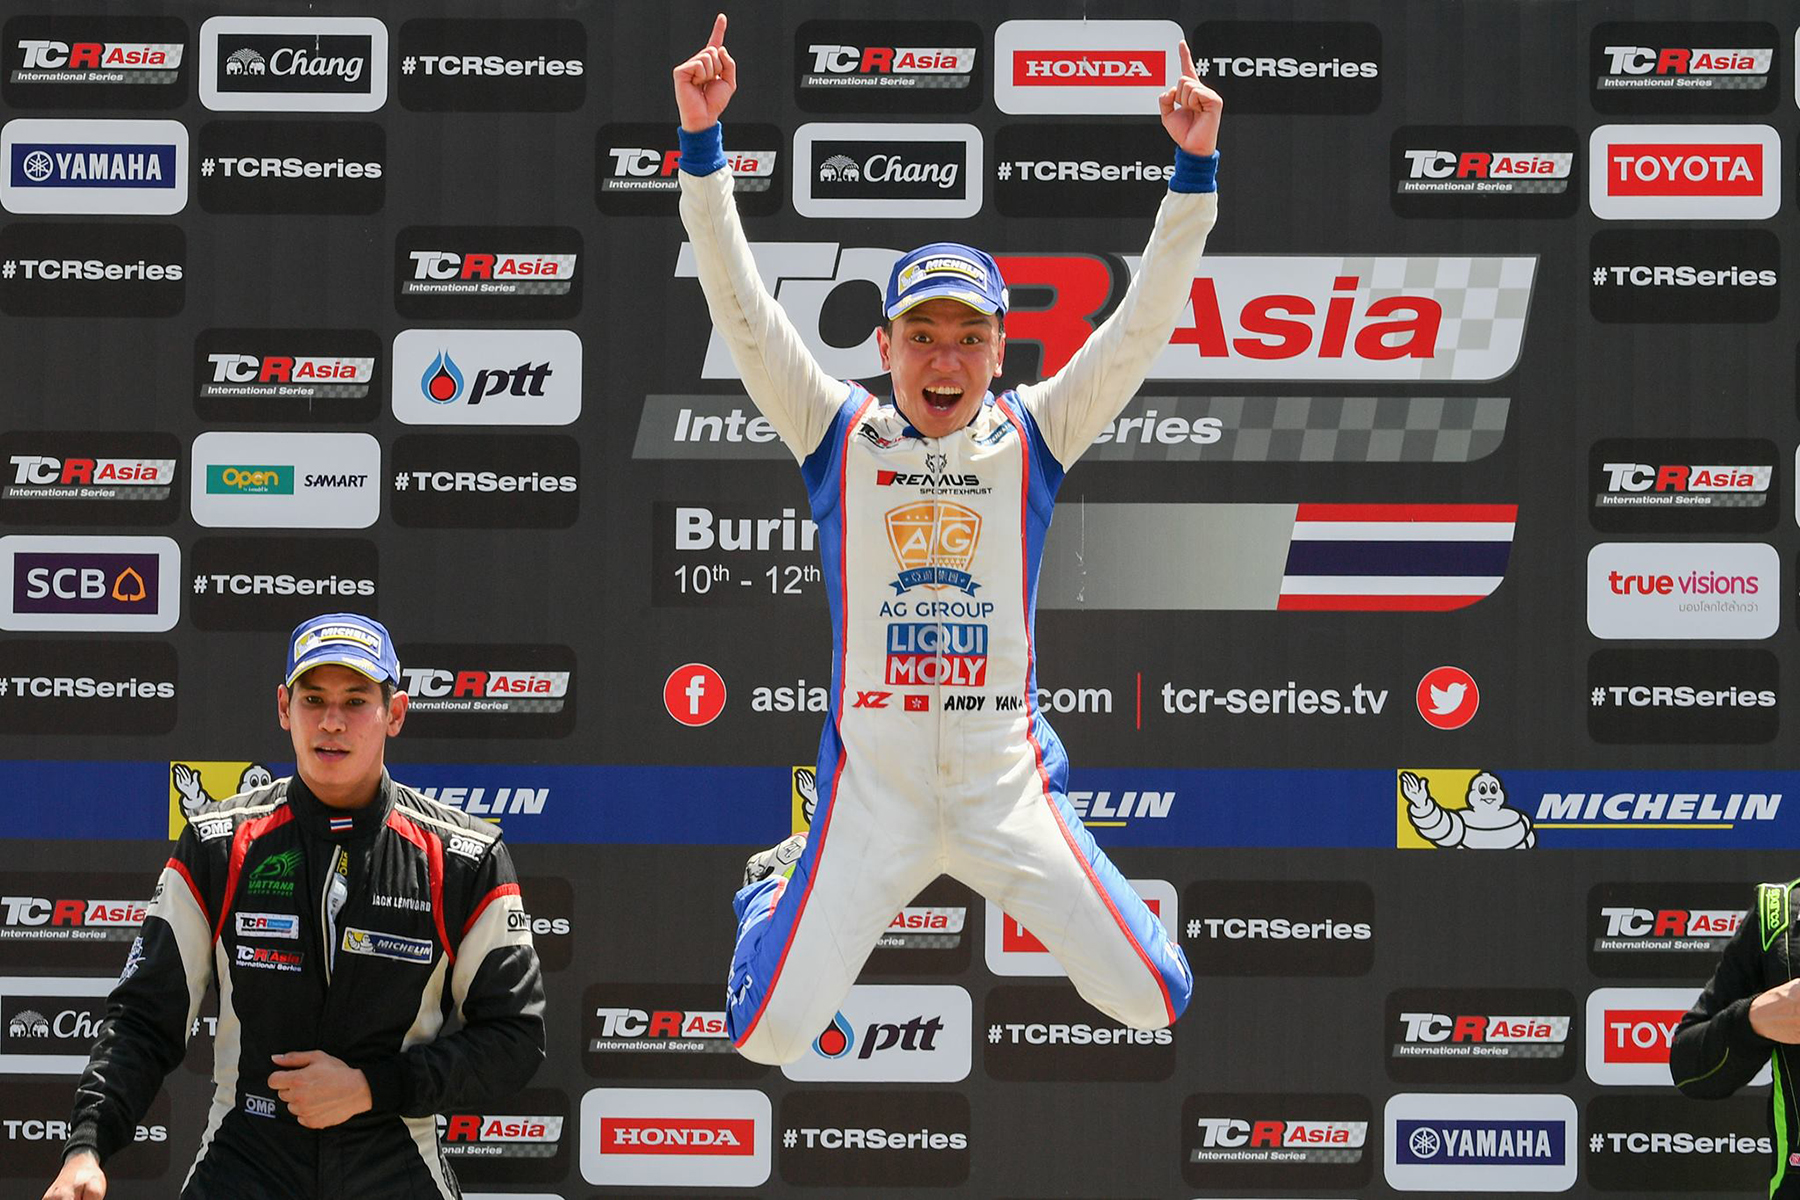 Andy Yan (born 21 October 1983) is a Hong Kong racing driver currently competing in the TCR Asia Series and Chinese Touring Car Championship. Yan began his career in 2011 in the Chinese Touring Car Championship, he won the championship in 2011 and 2013, he ended 2nd in 2012 and 3rd in 2014.